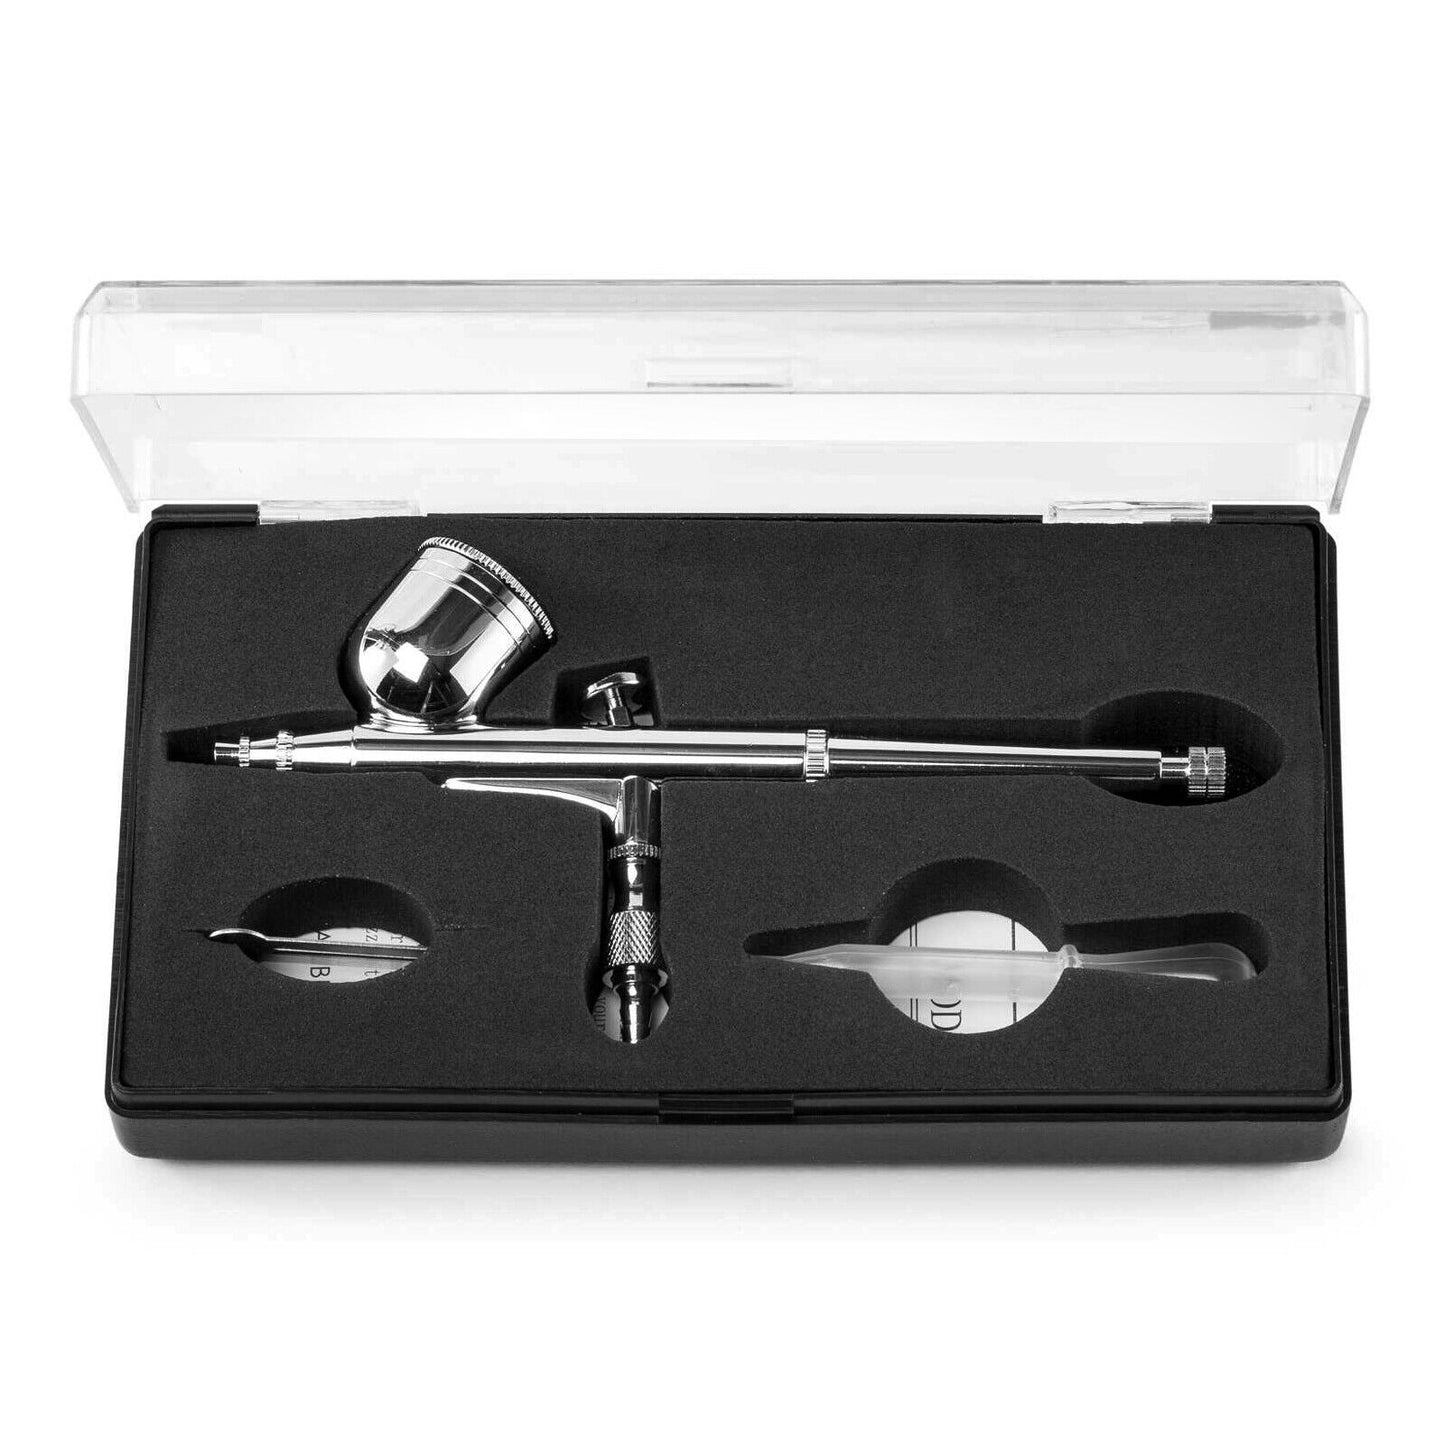 Dual Action Airbrush Kit with Mini Compressor